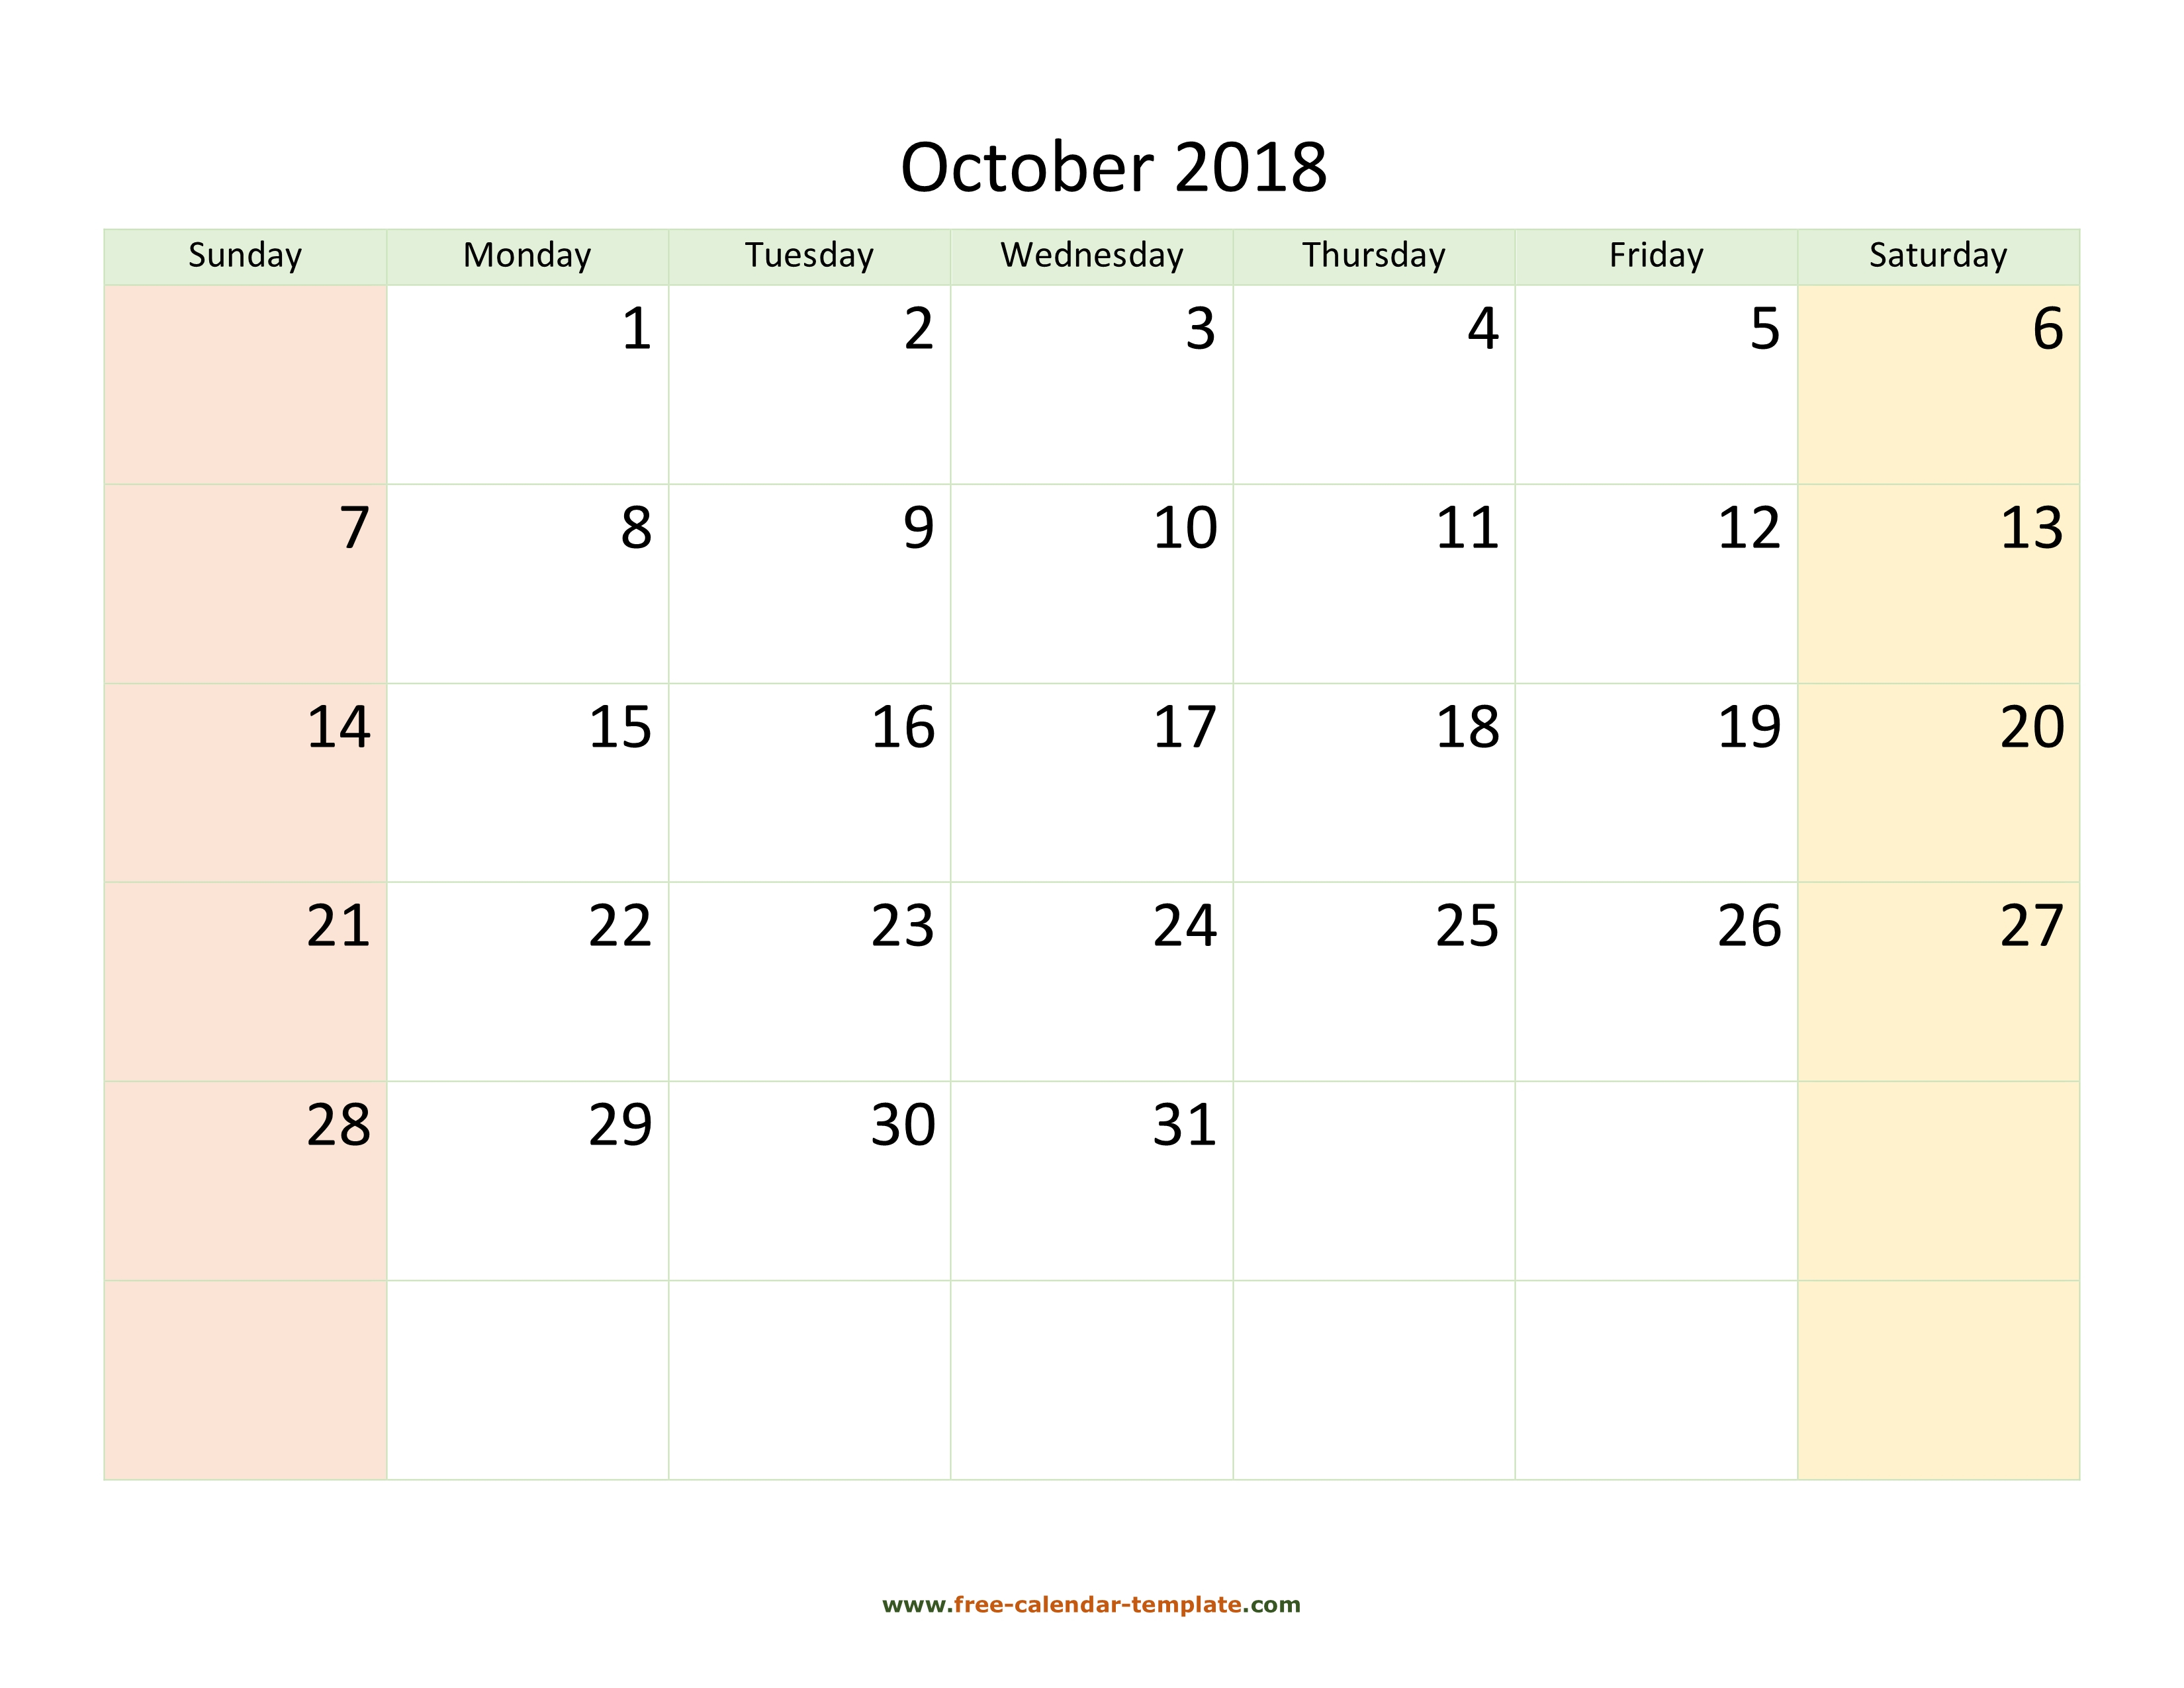 October 2018 Calendar Printable With Coloring On Weekend